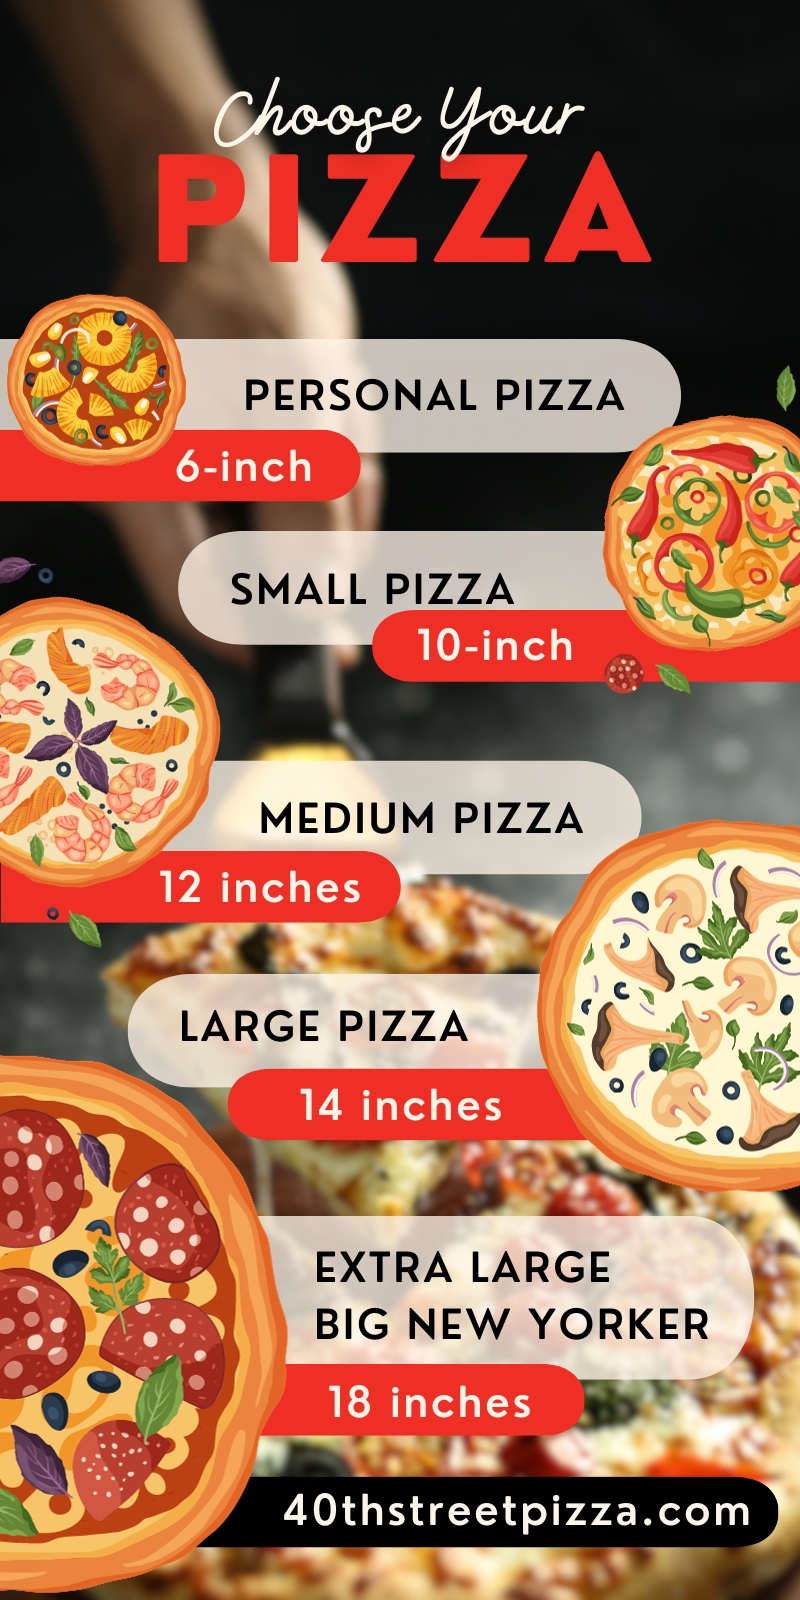 Closest Pizza Hut: Convenience at Your Fingertips